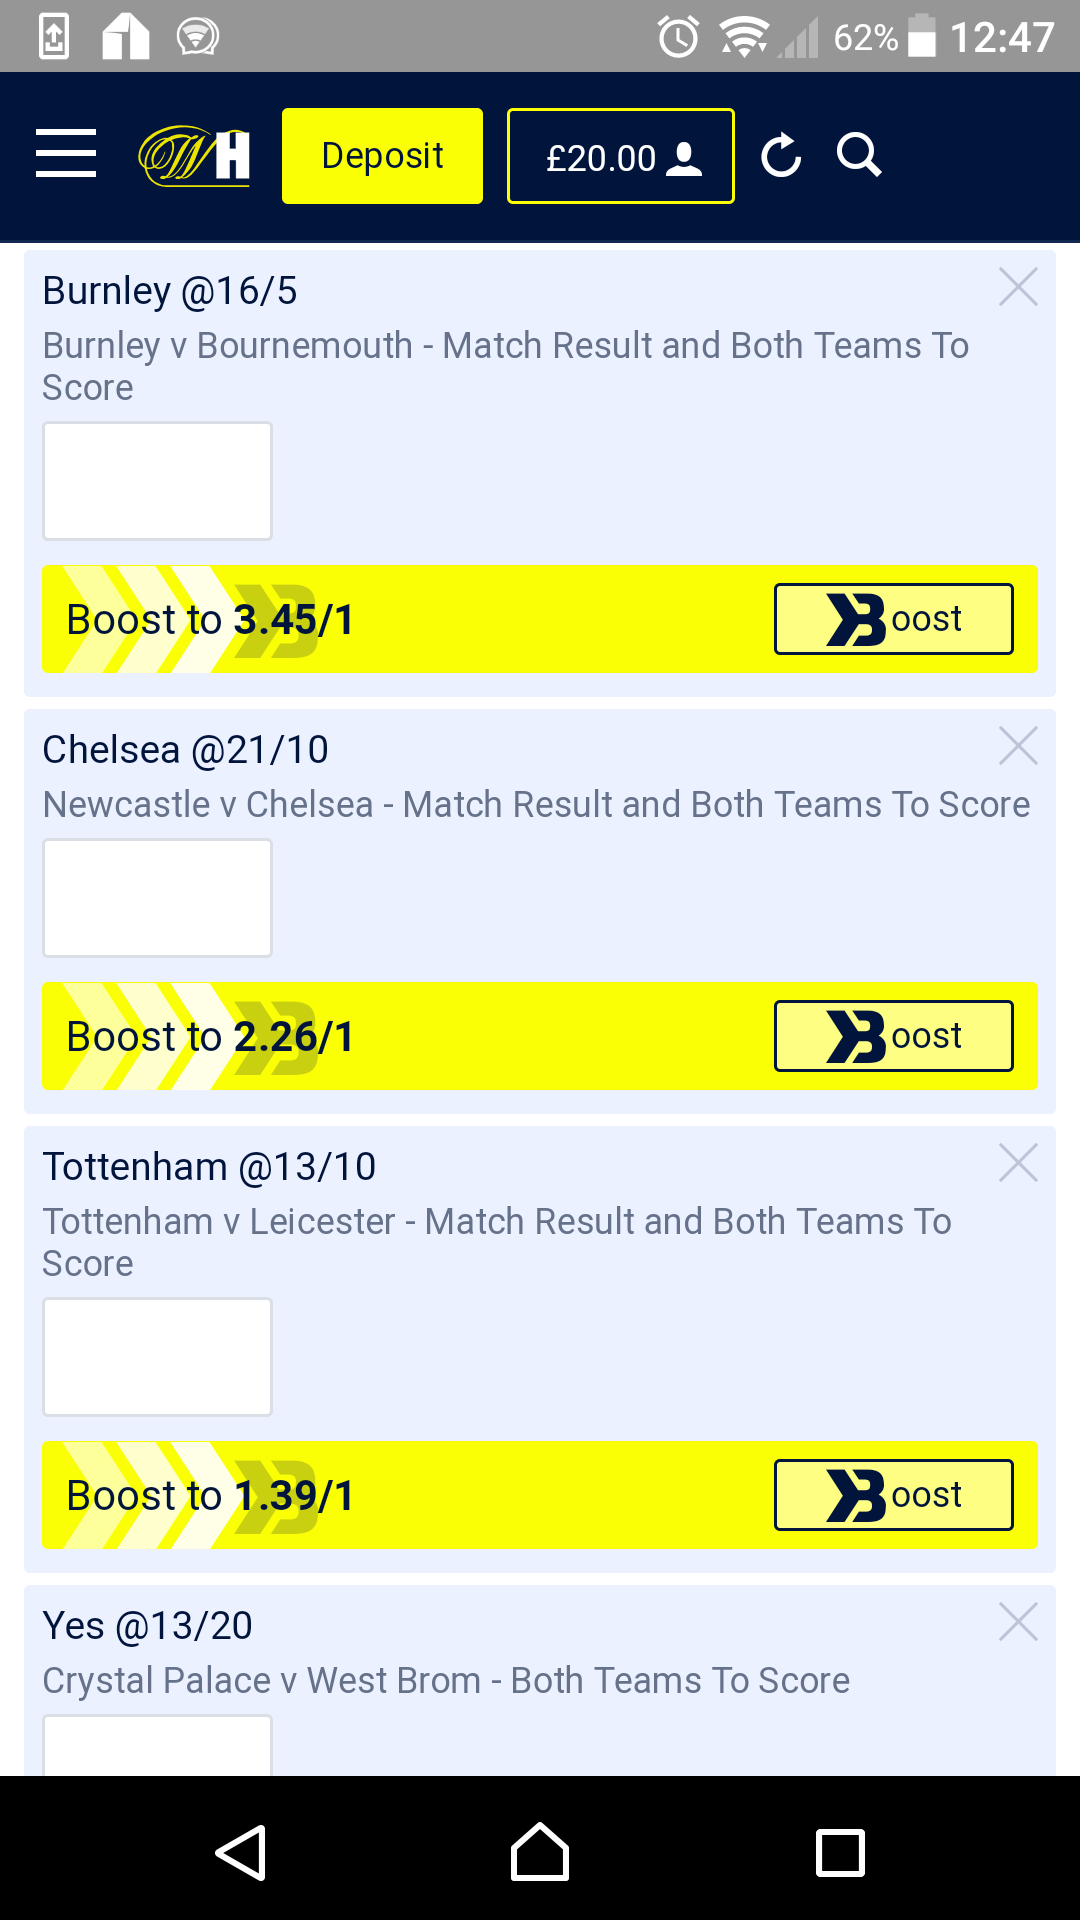 good luck on yer footy bets lads